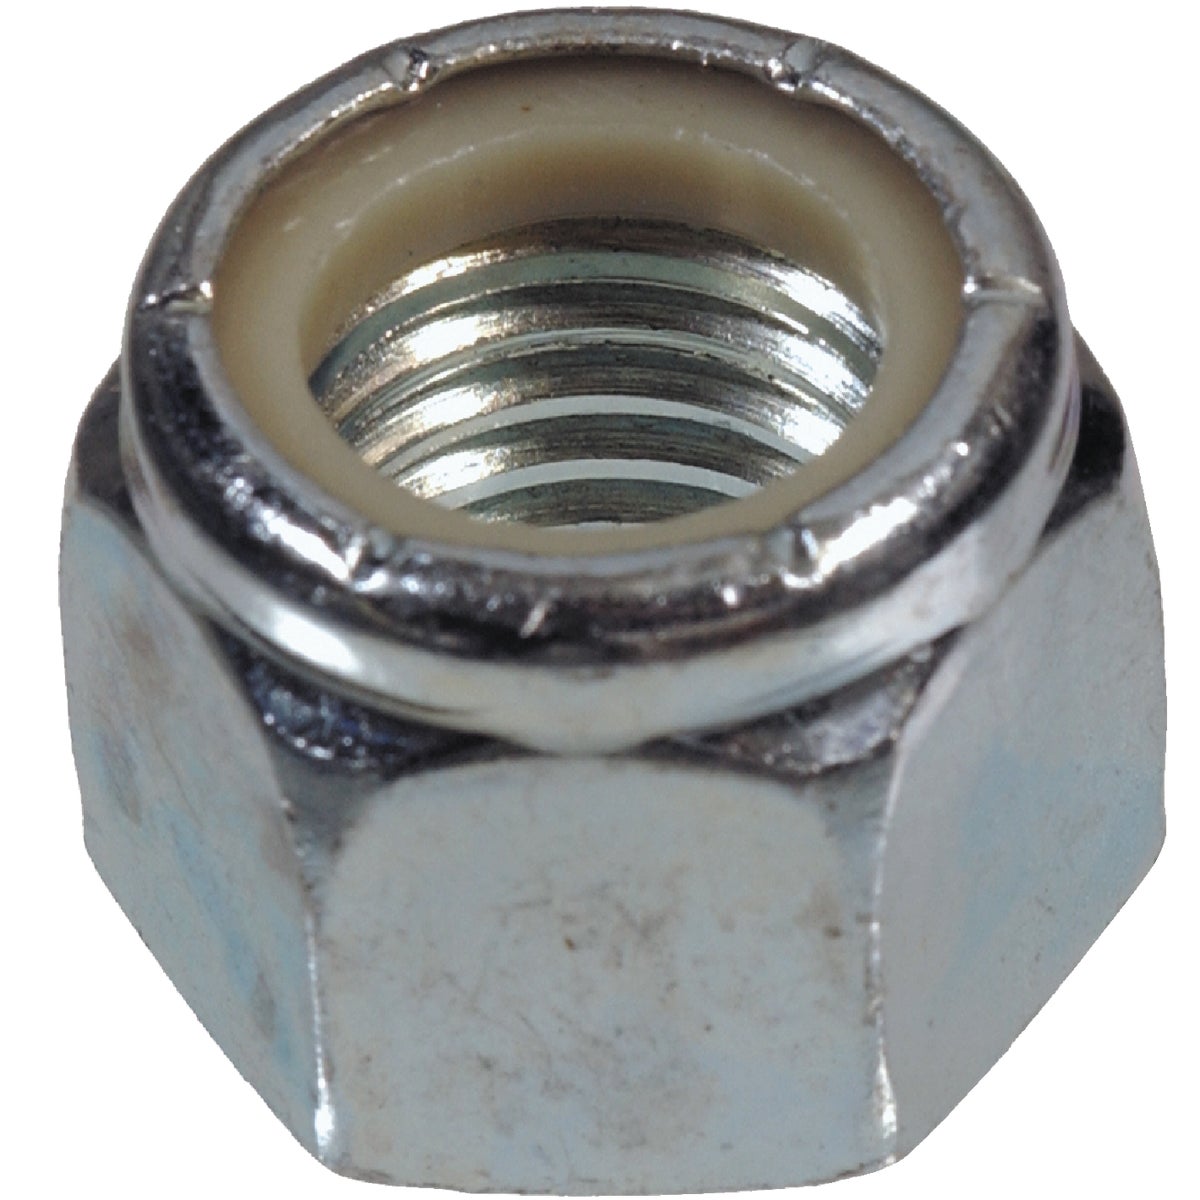 Item 720925, These nylon insert stop &amp; lock nuts are ideal to securely fasten a bolt